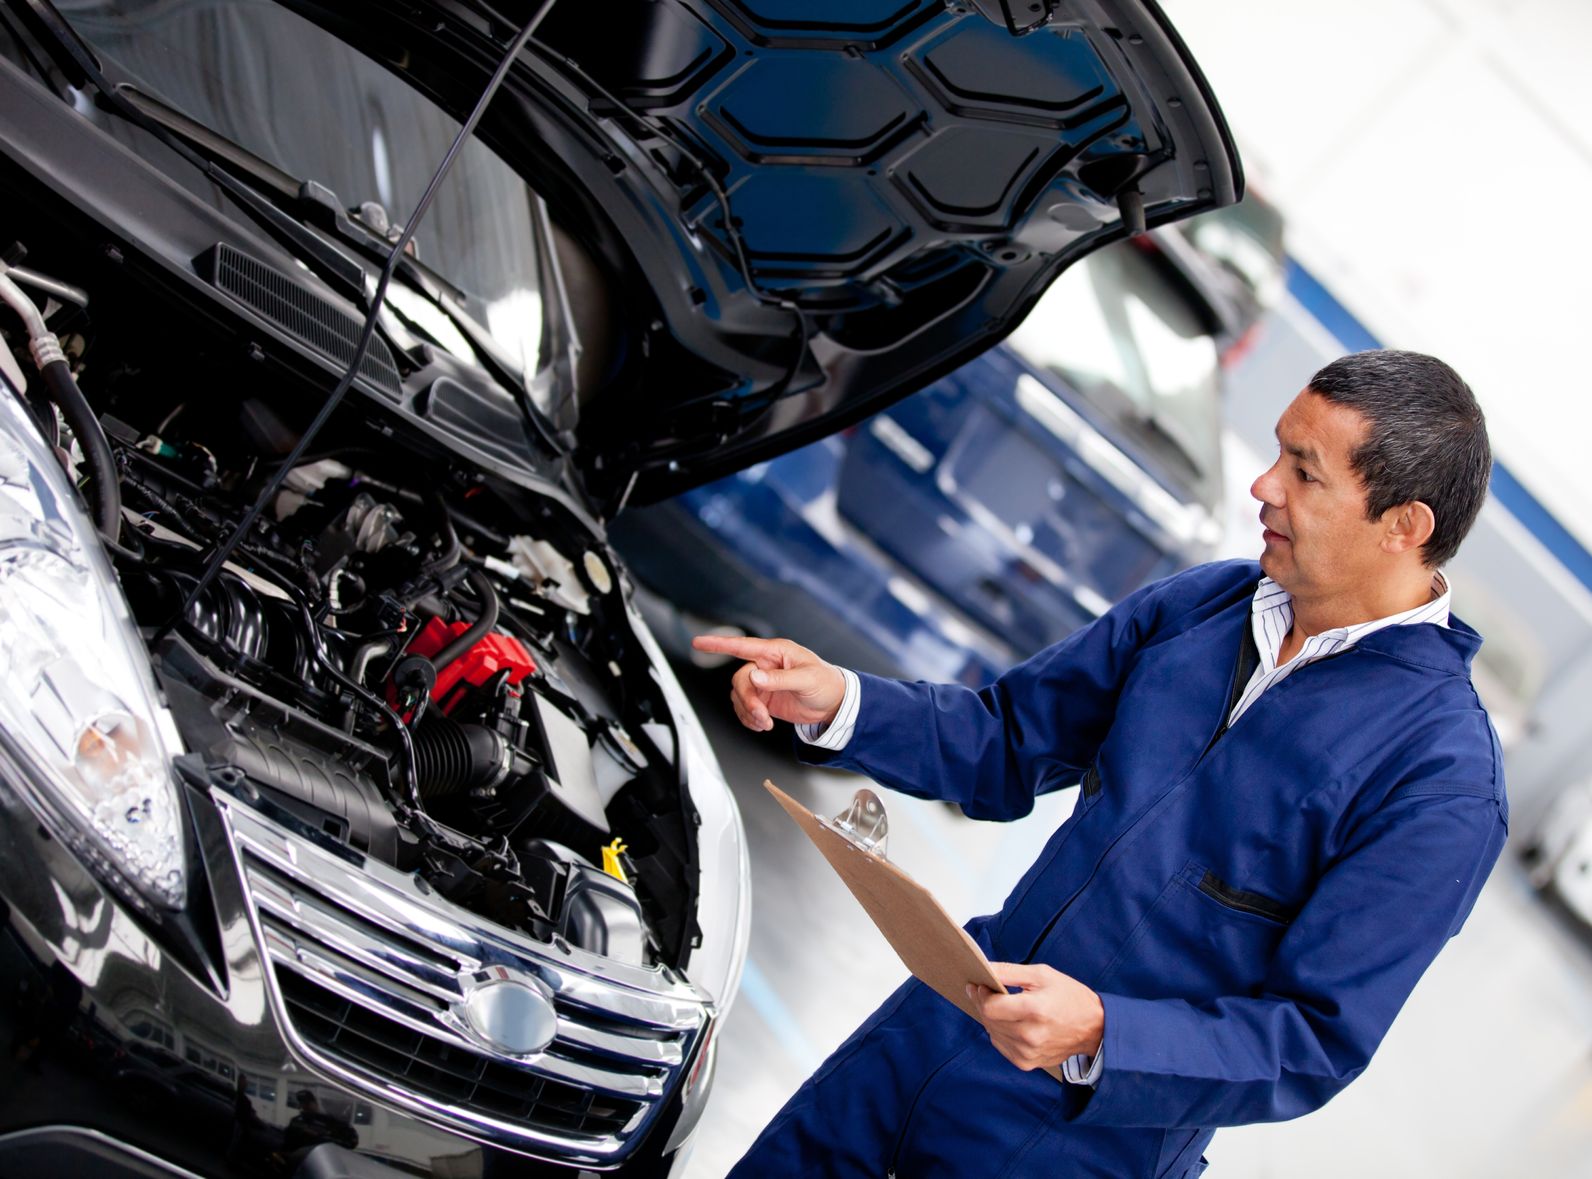 Restore Collision Damage With Expert Auto Body Repair in Johnson County